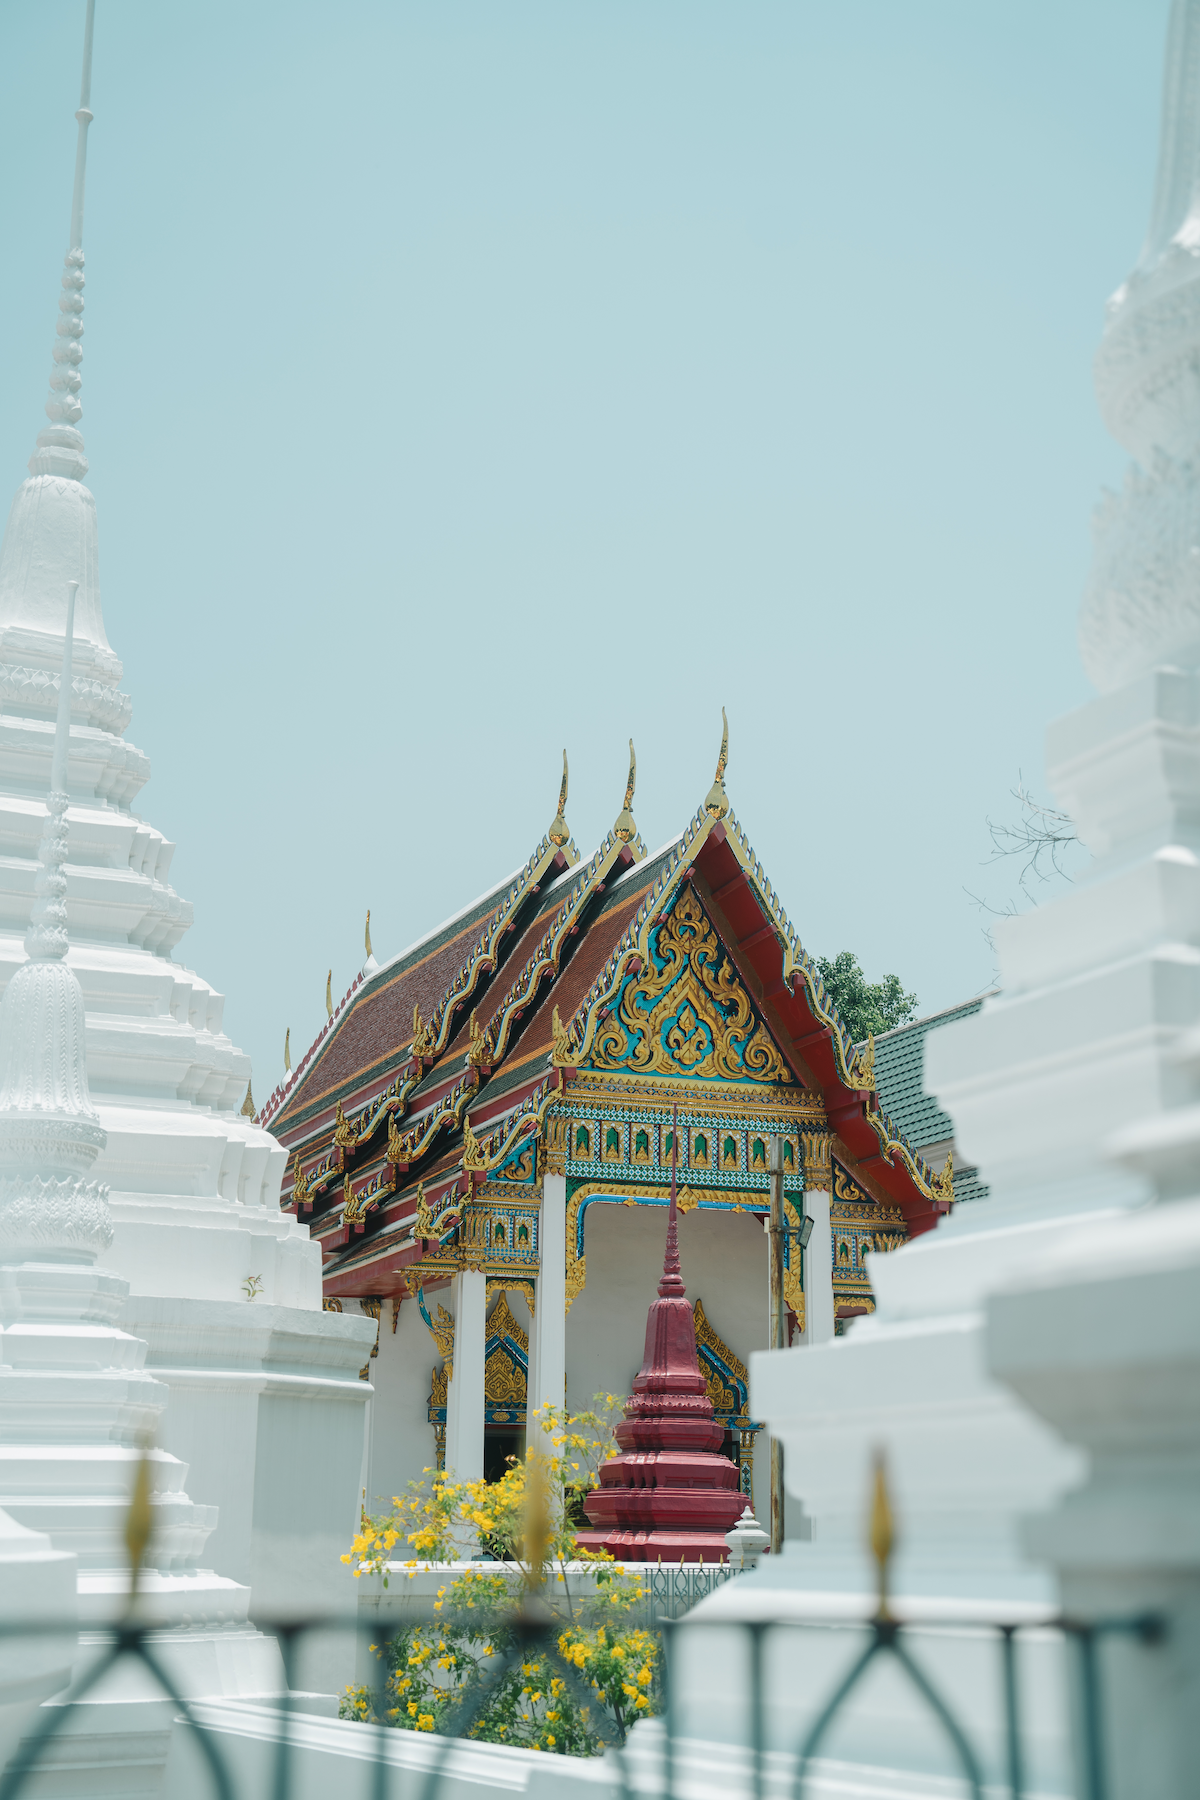 Colourful architecture details amidst the white structures in the Wat Pho Temple